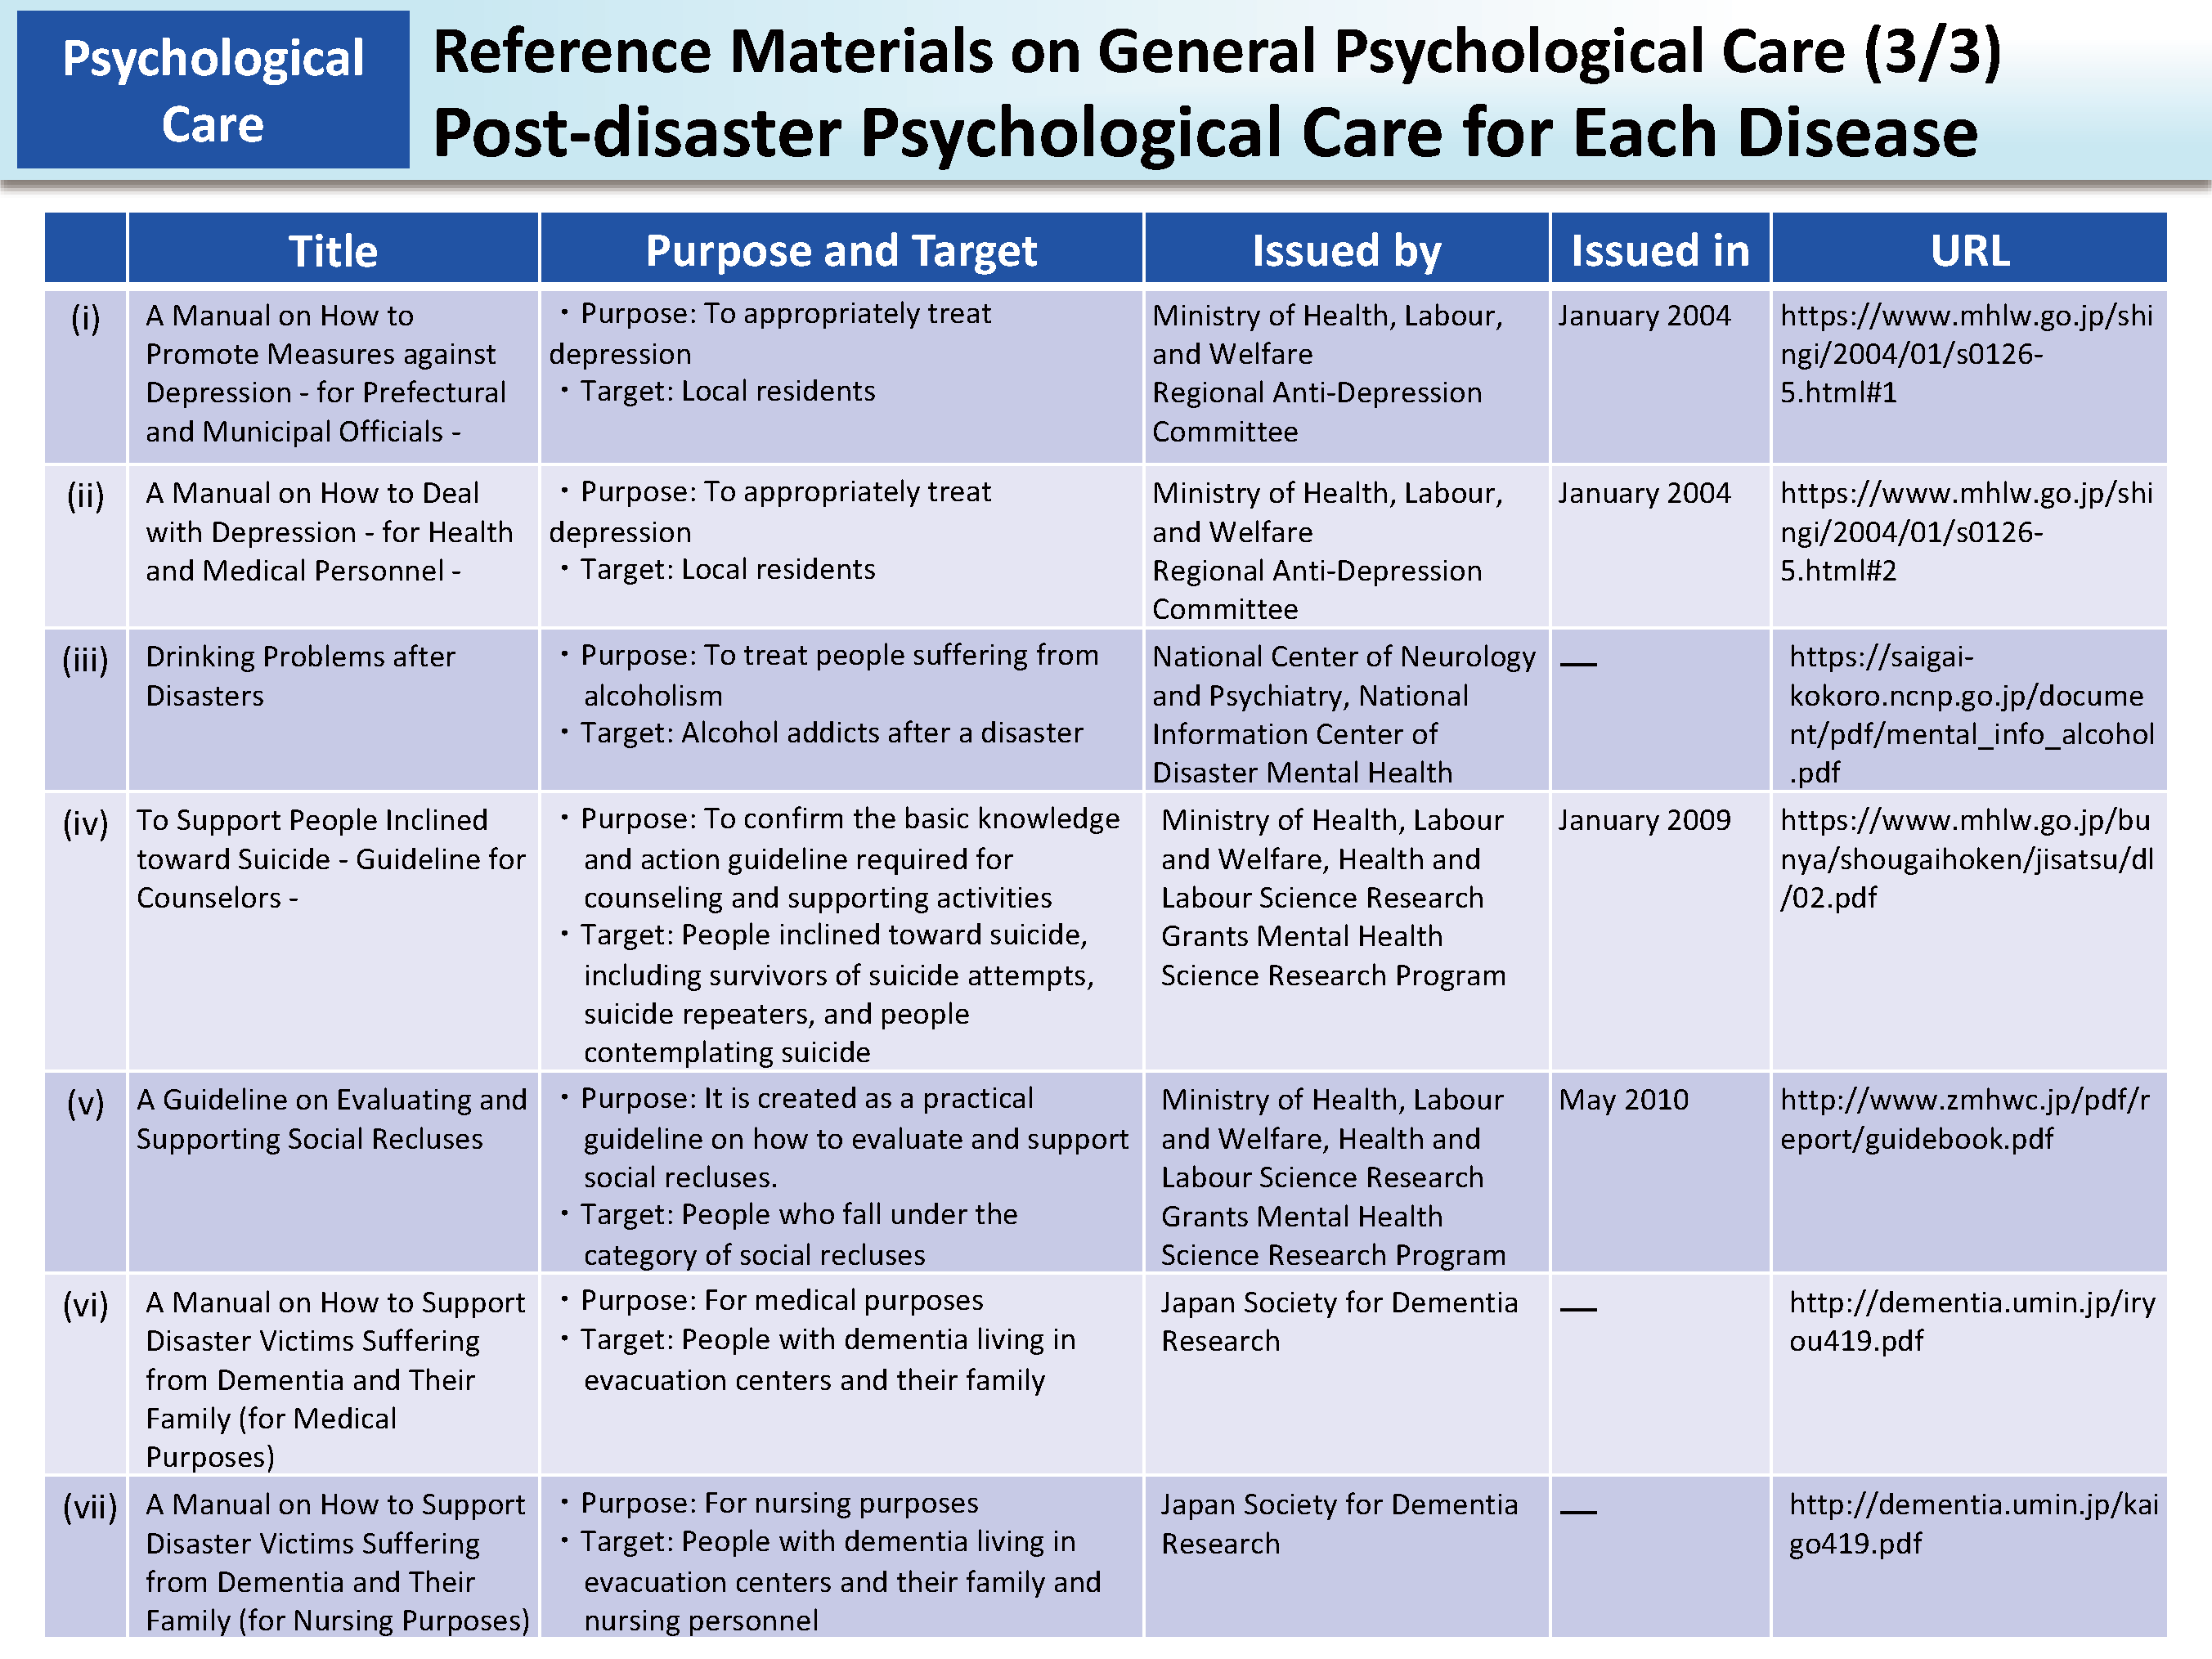 Reference Materials on General Psychological Care (3/3) Post-disaster Psychological Care for Each Disease_Figure